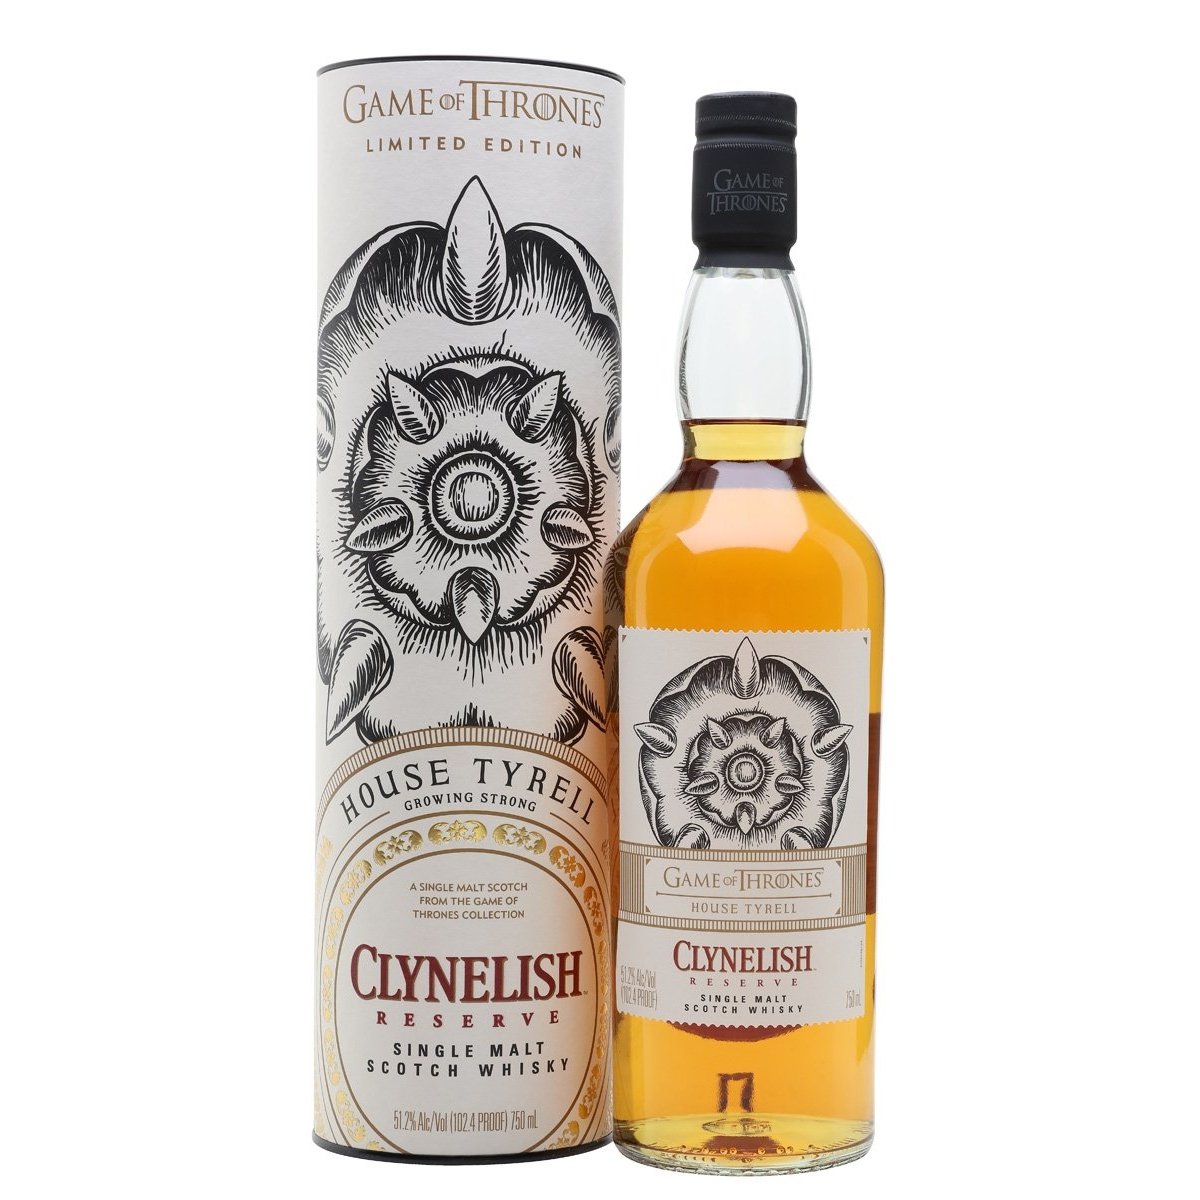 Clynelish Reserve GAME OF THRONES House Tyrell Single Malt Collection 51,2% Vol. 0,7l in Giftbox